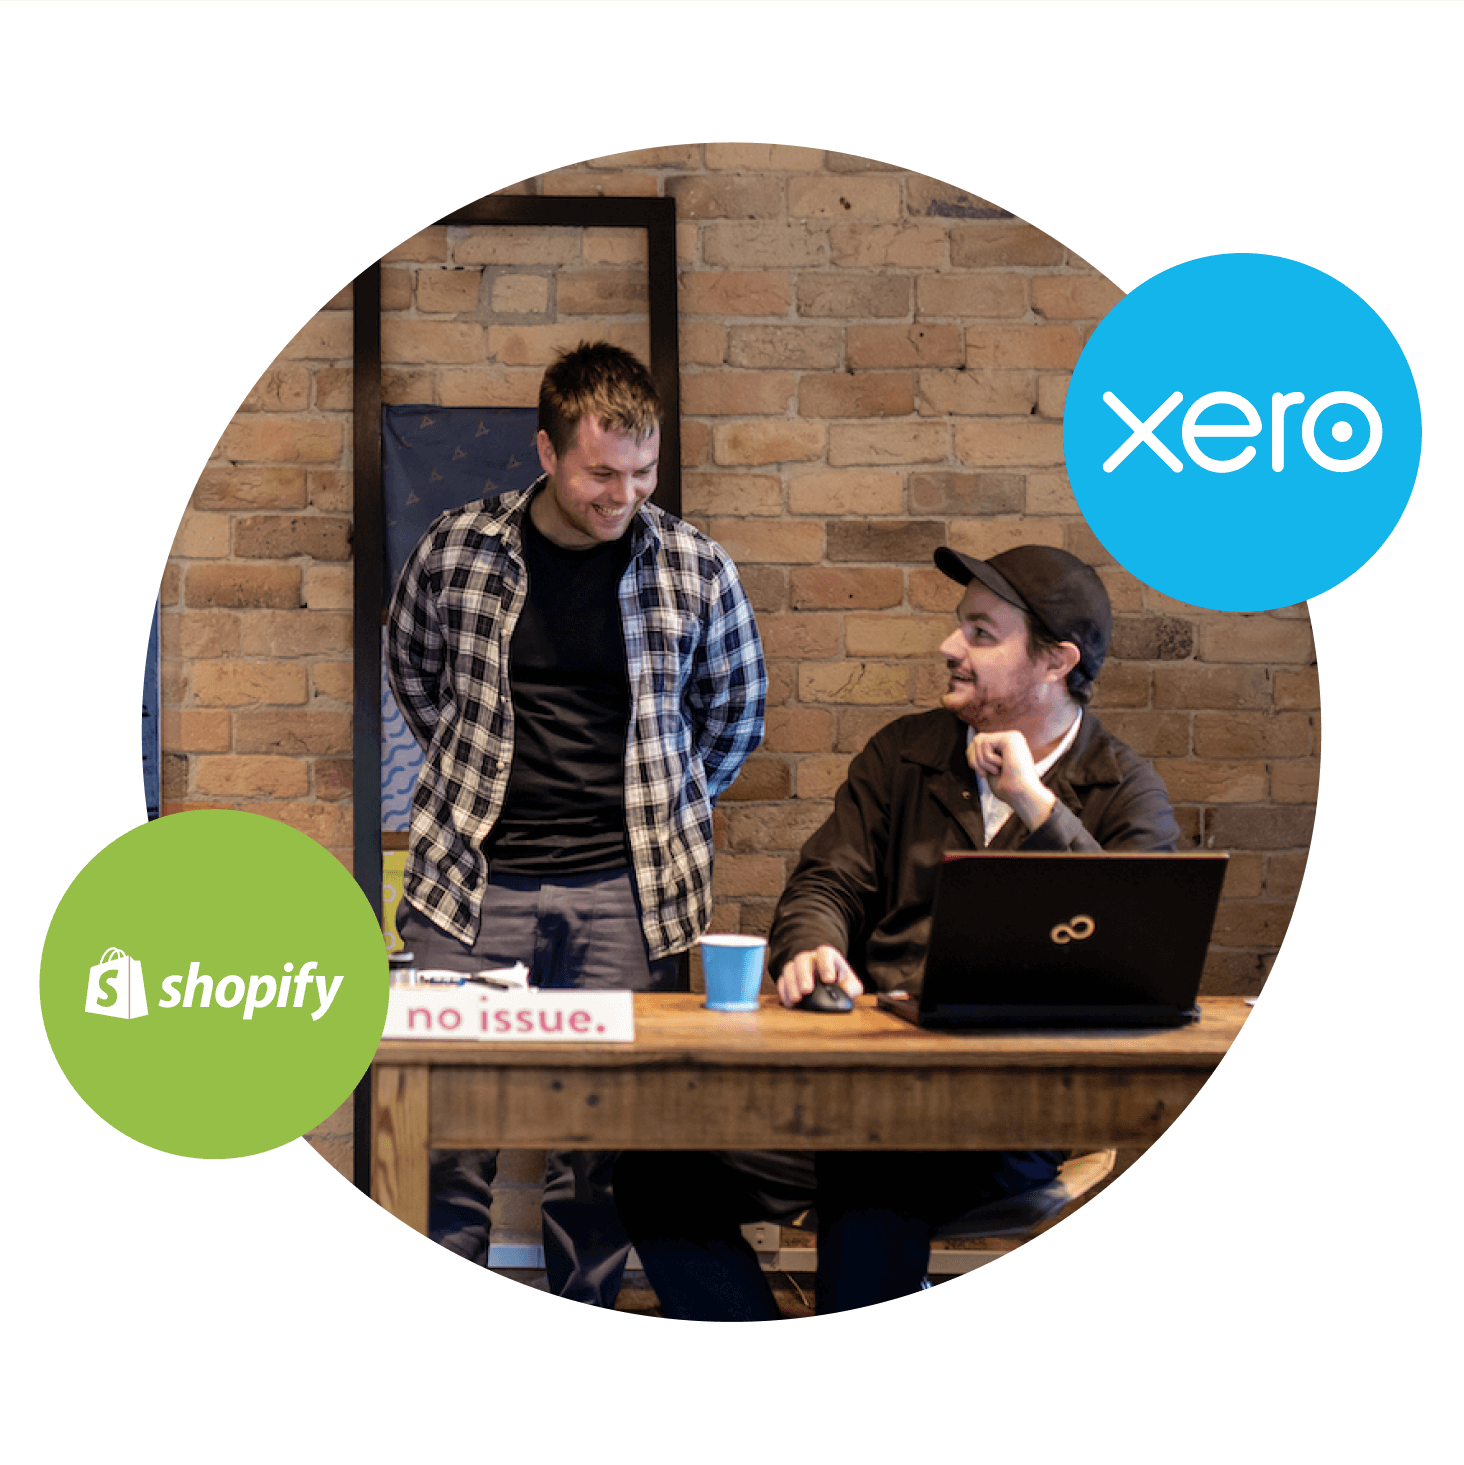 Two New Zealand ecommerce sellers chat about the increase in sales since using Shopify and Xero for their online store.